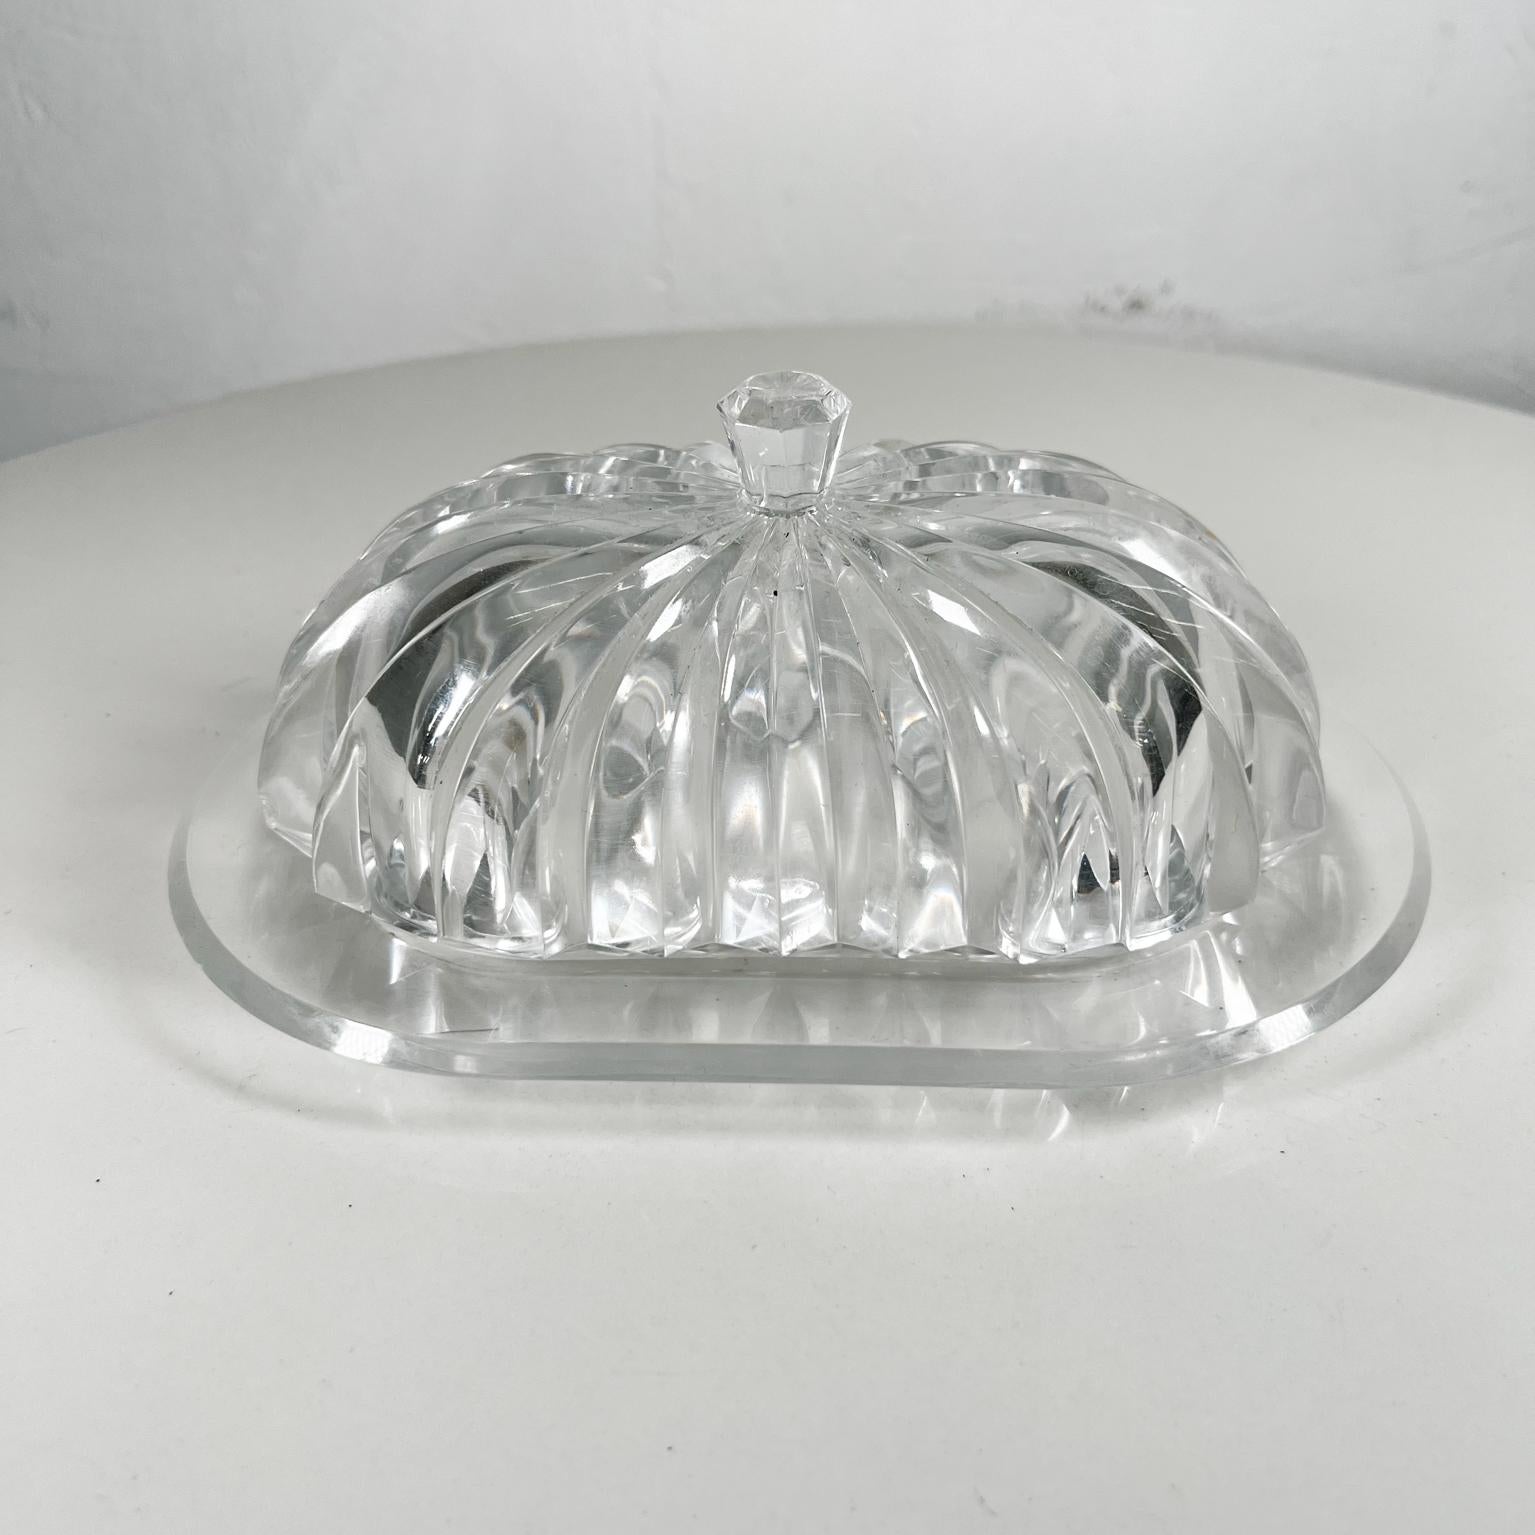 Mid-Century Modern 1970s Modern Ribbed Butter Dish Tiara Lucite Grainware by William Bounds